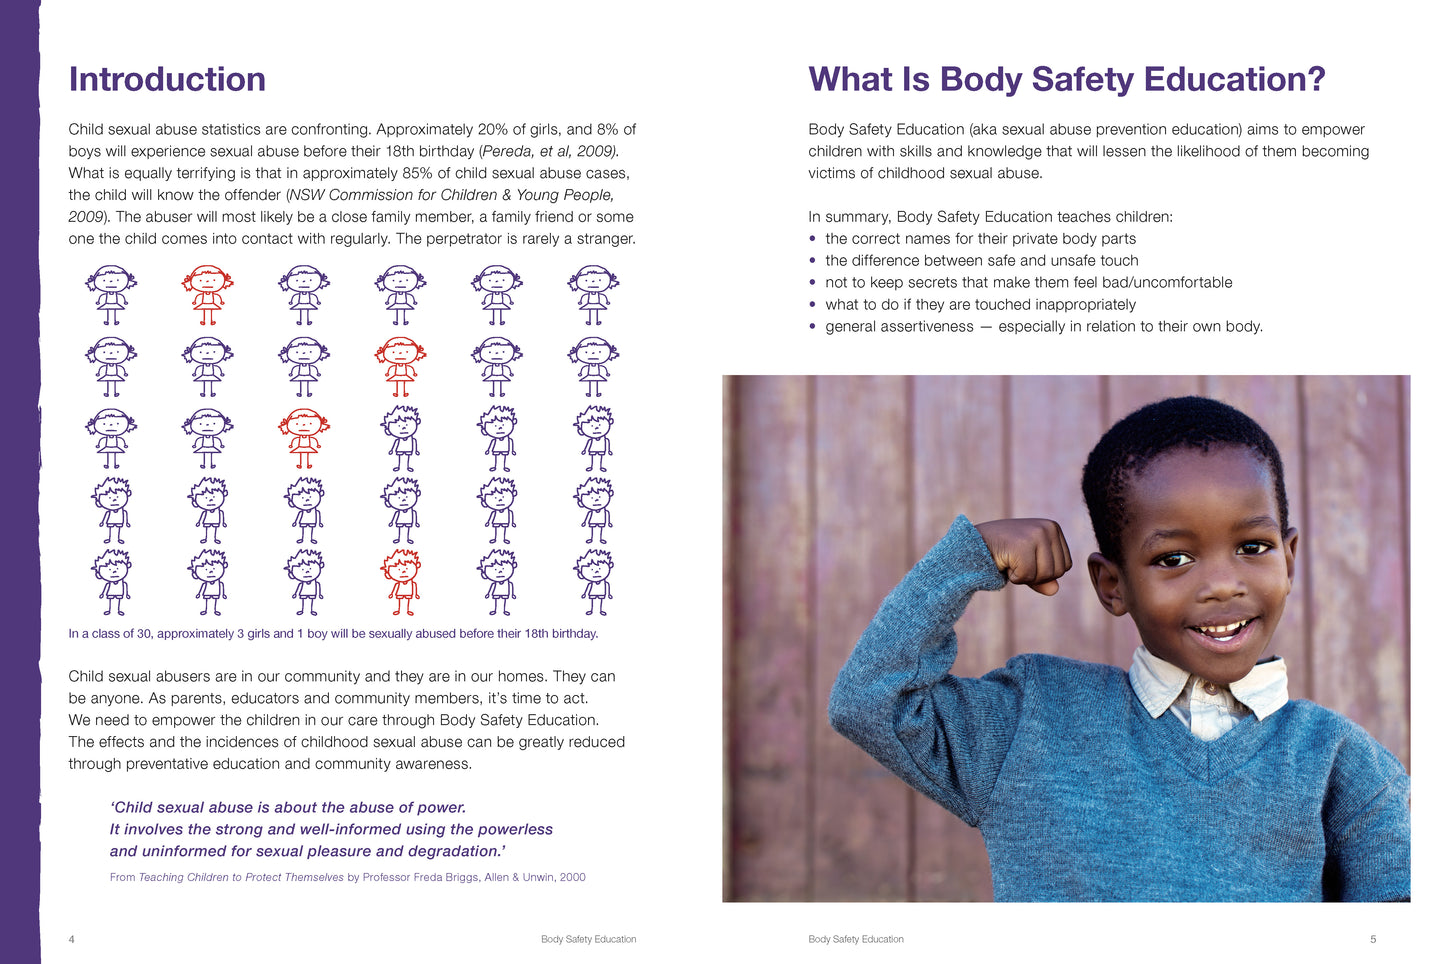 A page from the book 'Body Safety Education' by Jayneen Sanders